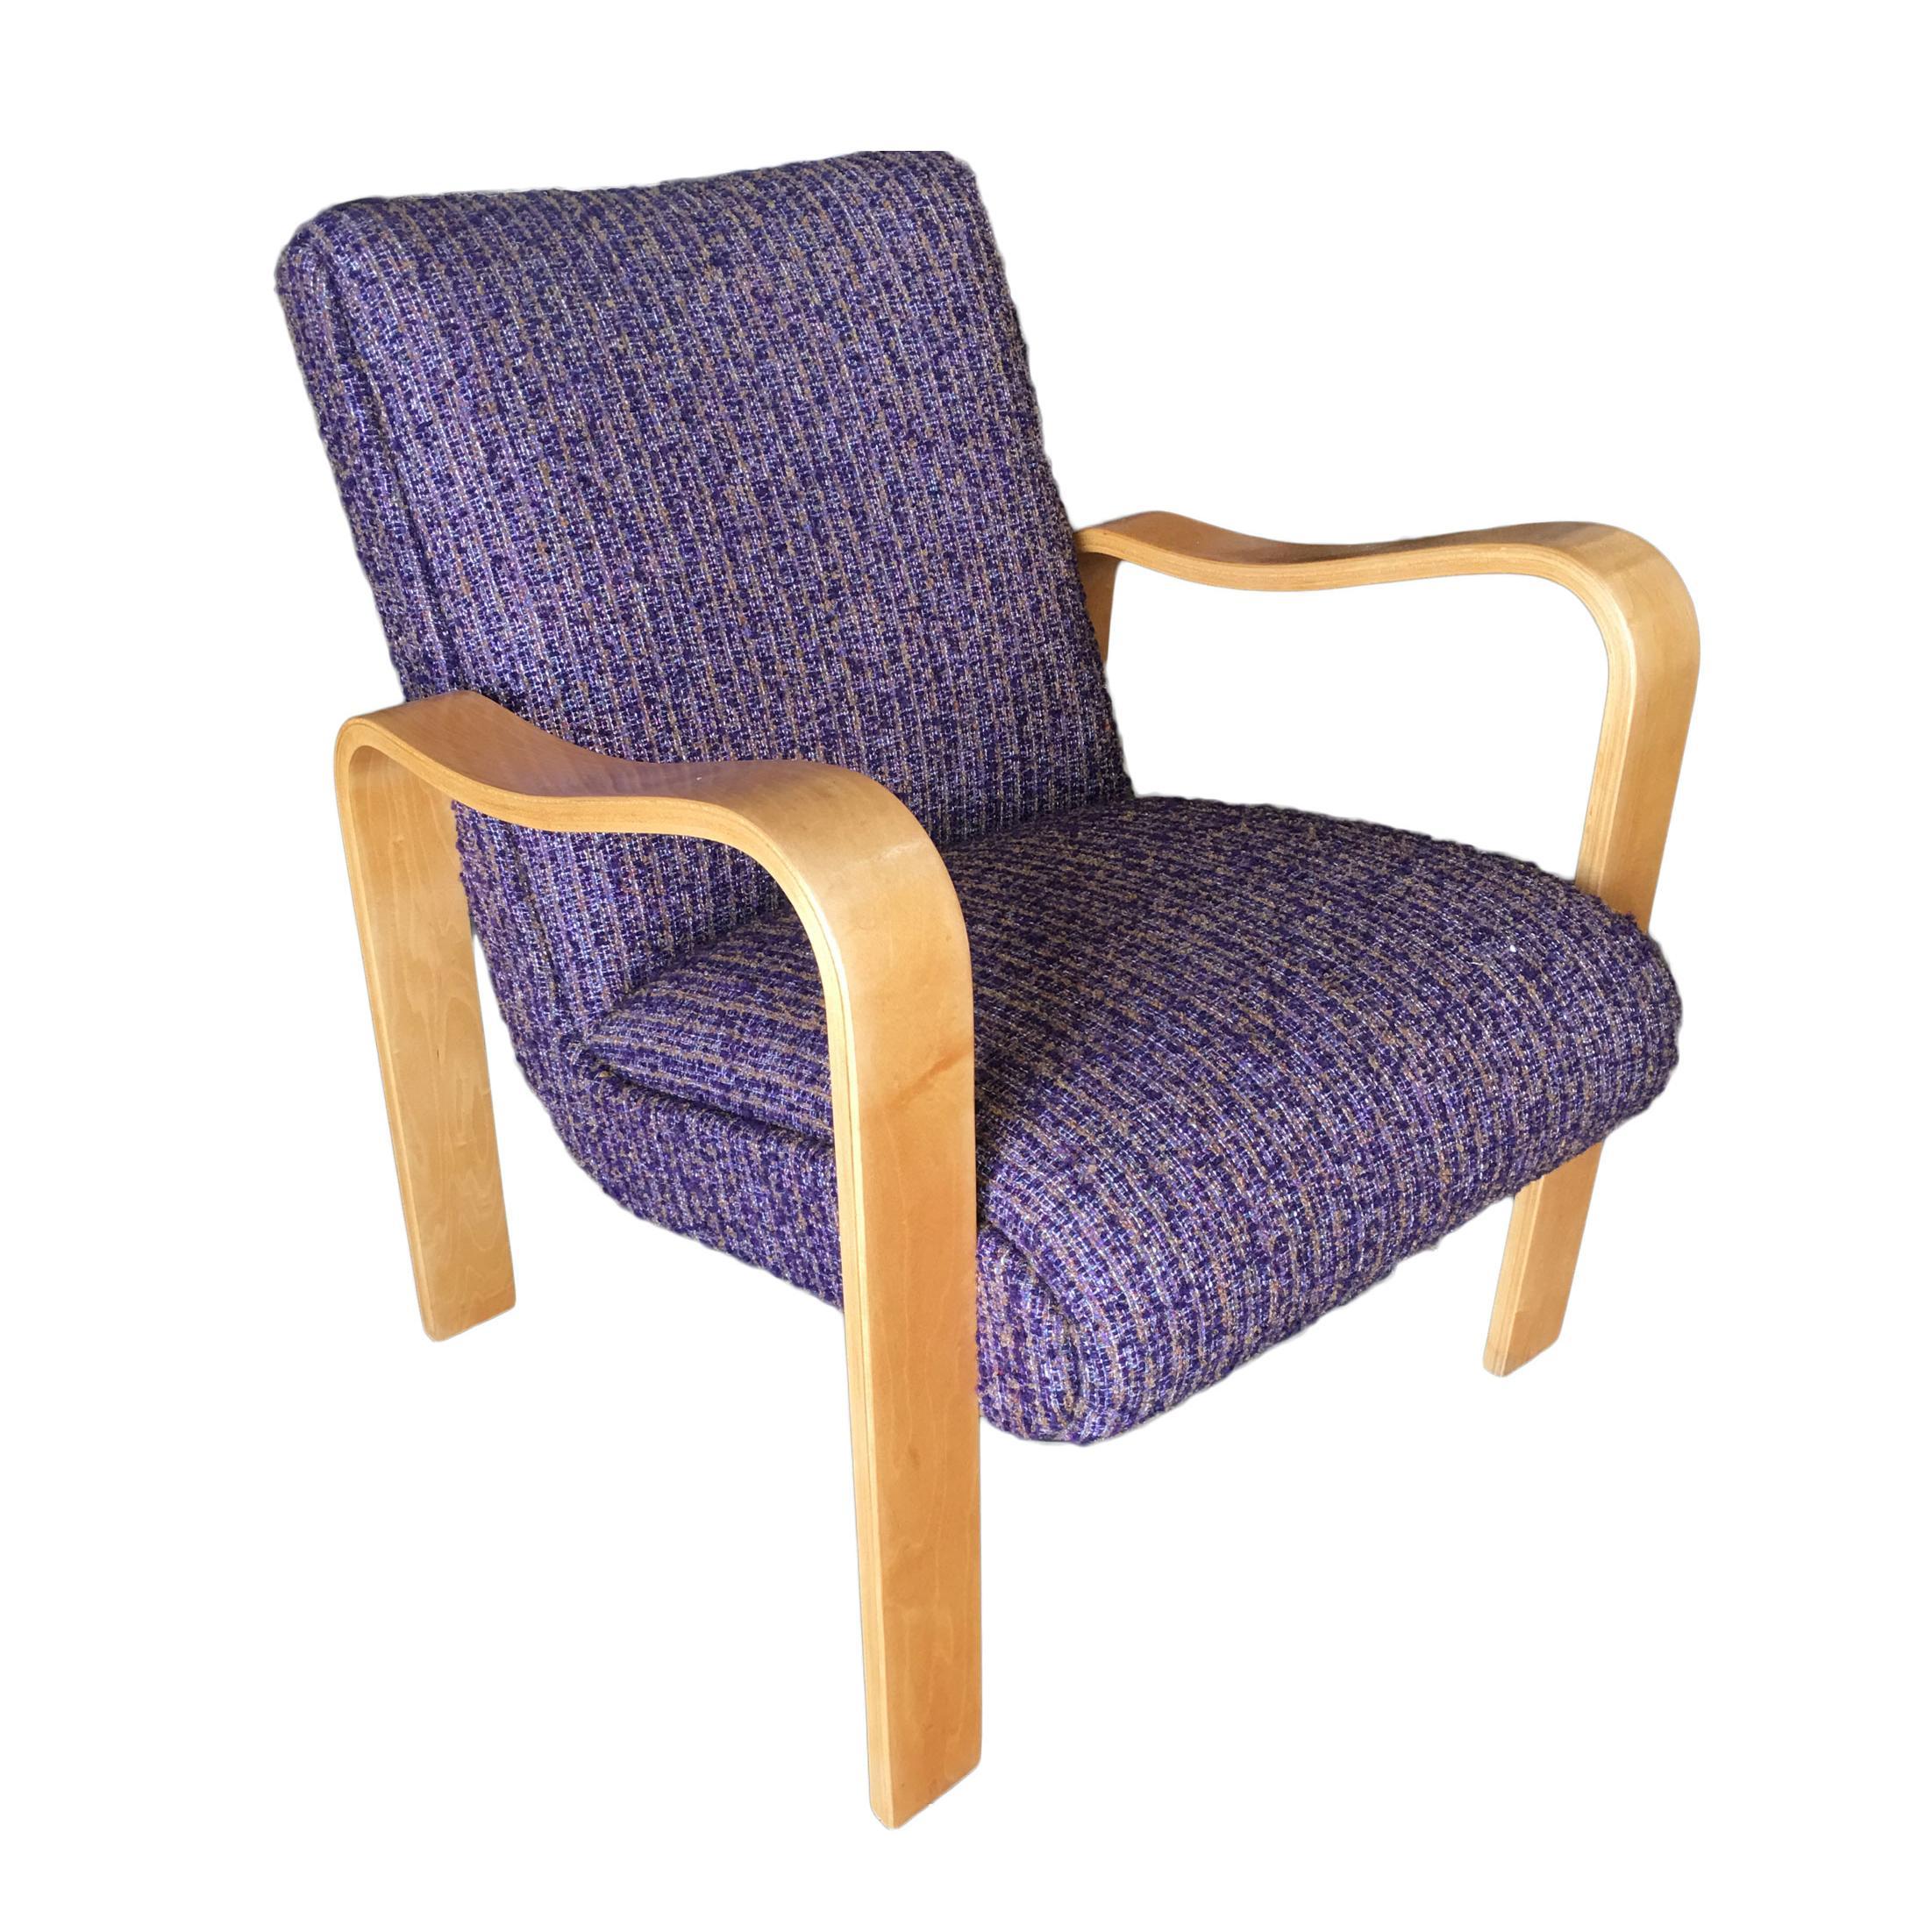 Thonet Bentwood Armchair with Purple Seat